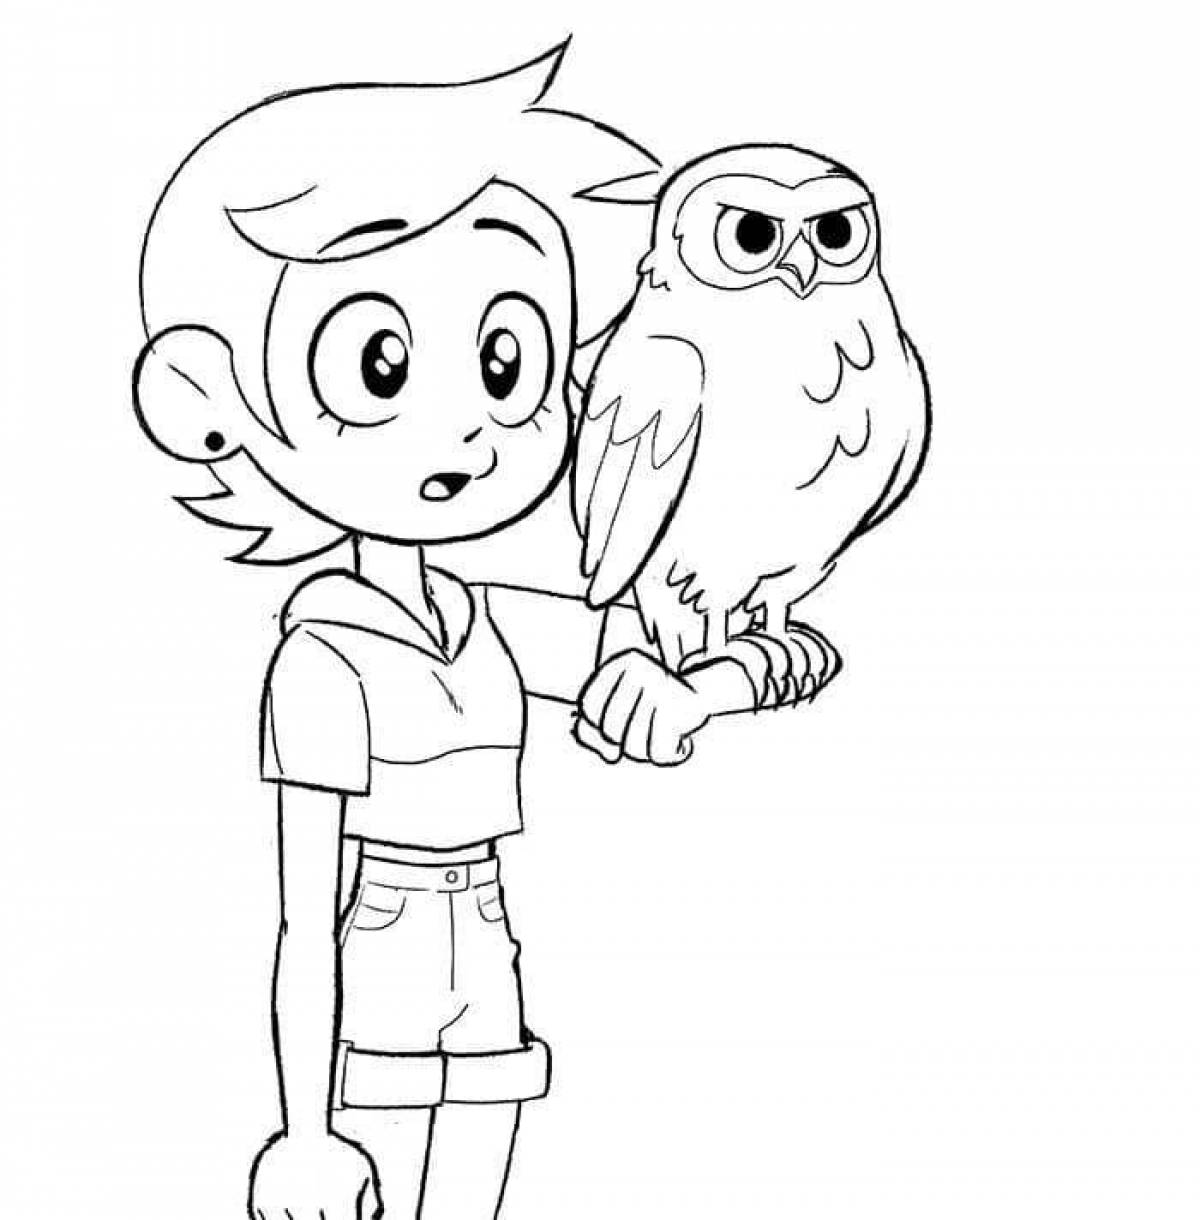 Coloring page wild owl house